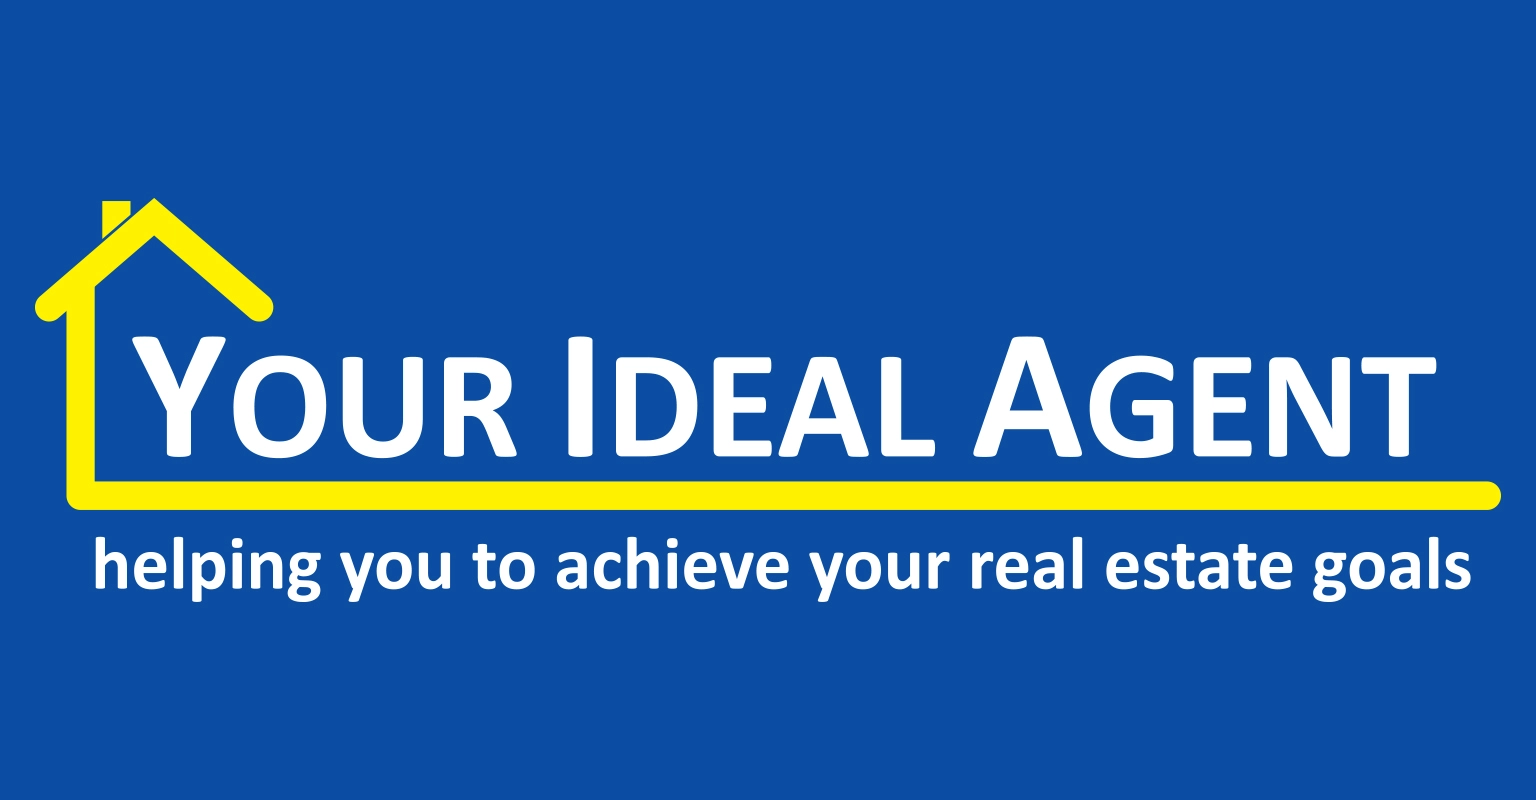 Real Estate Agency Your Ideal Agent